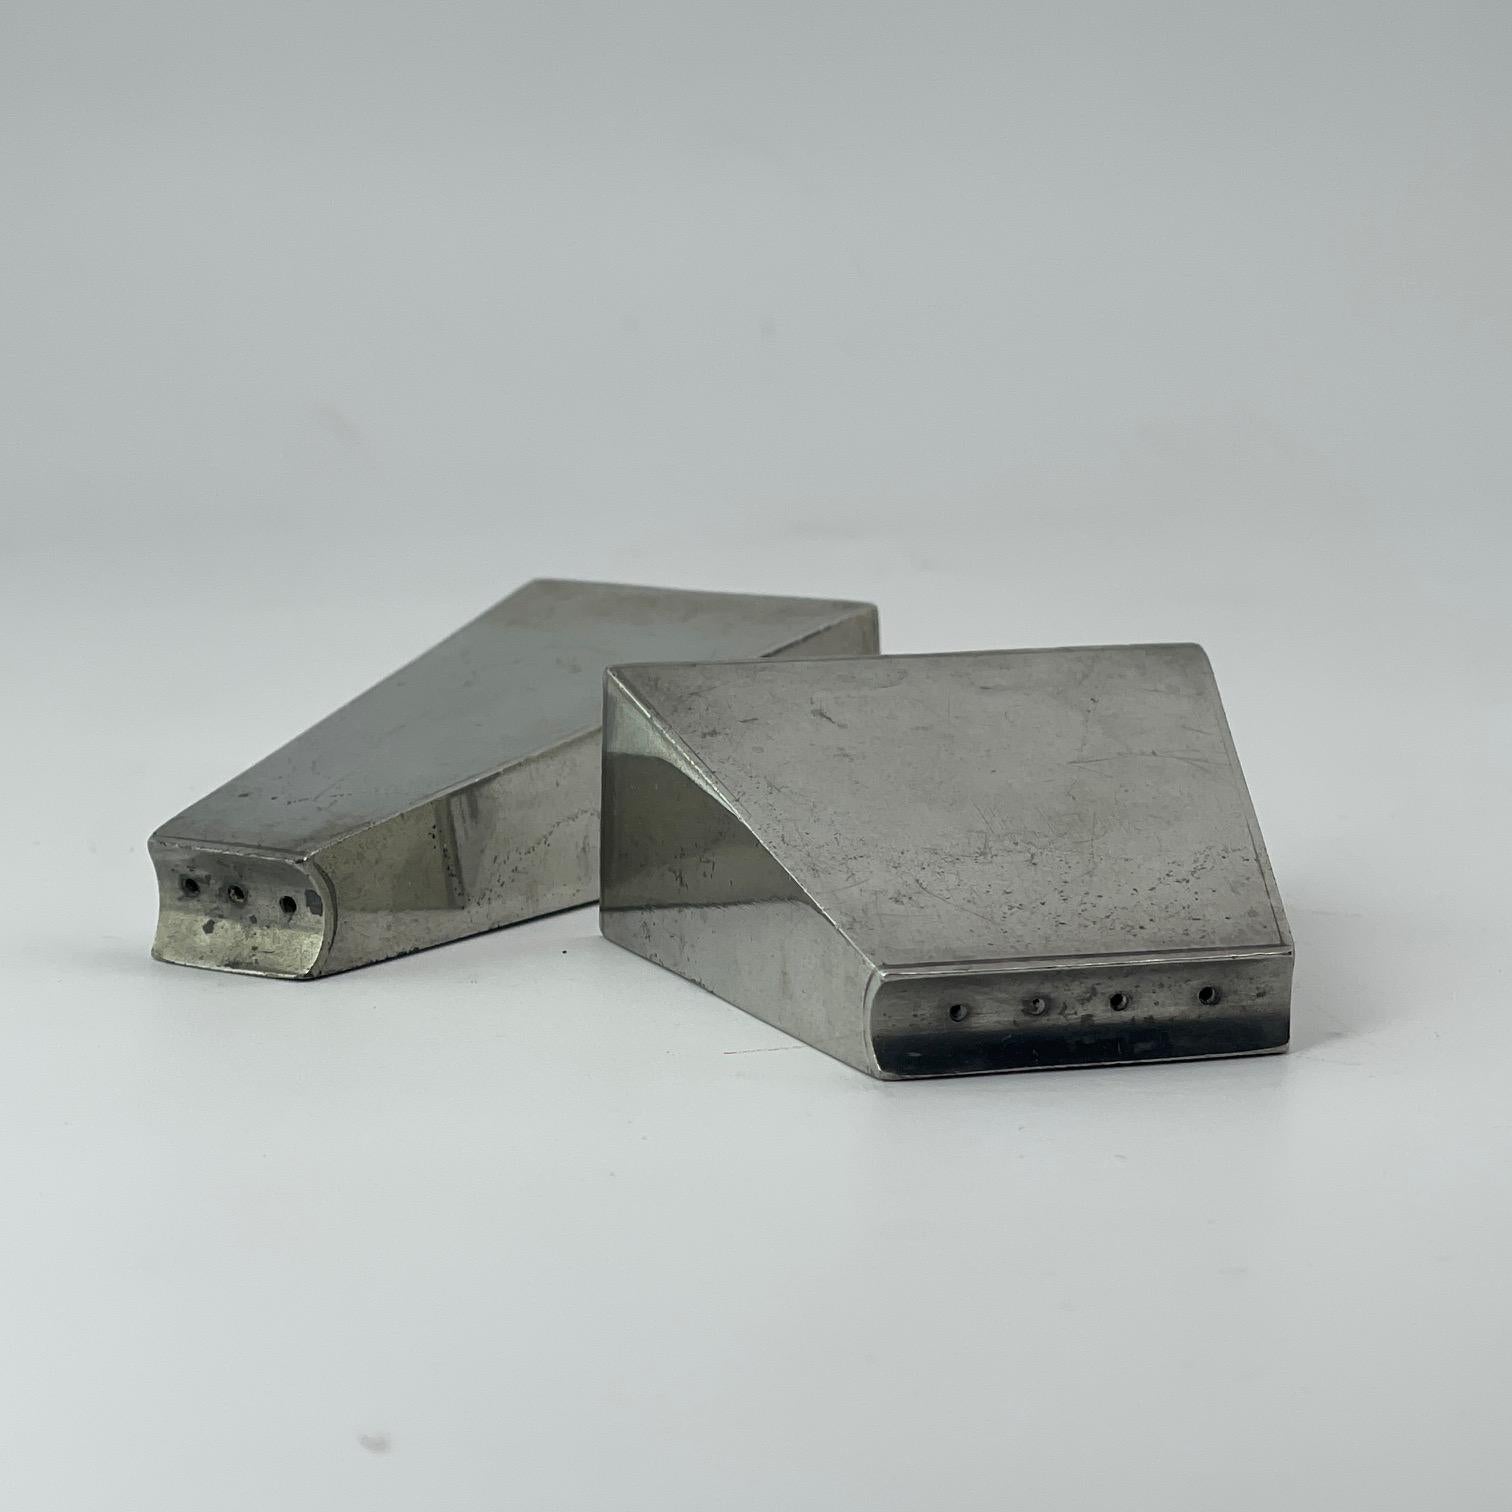 Patinated Pyramid Salt and Pepper Vessels. Design is attributed to Paul Evans. 

W 2 x 15/16 x 2 in
W 1.5 x 15/16 x 3 in